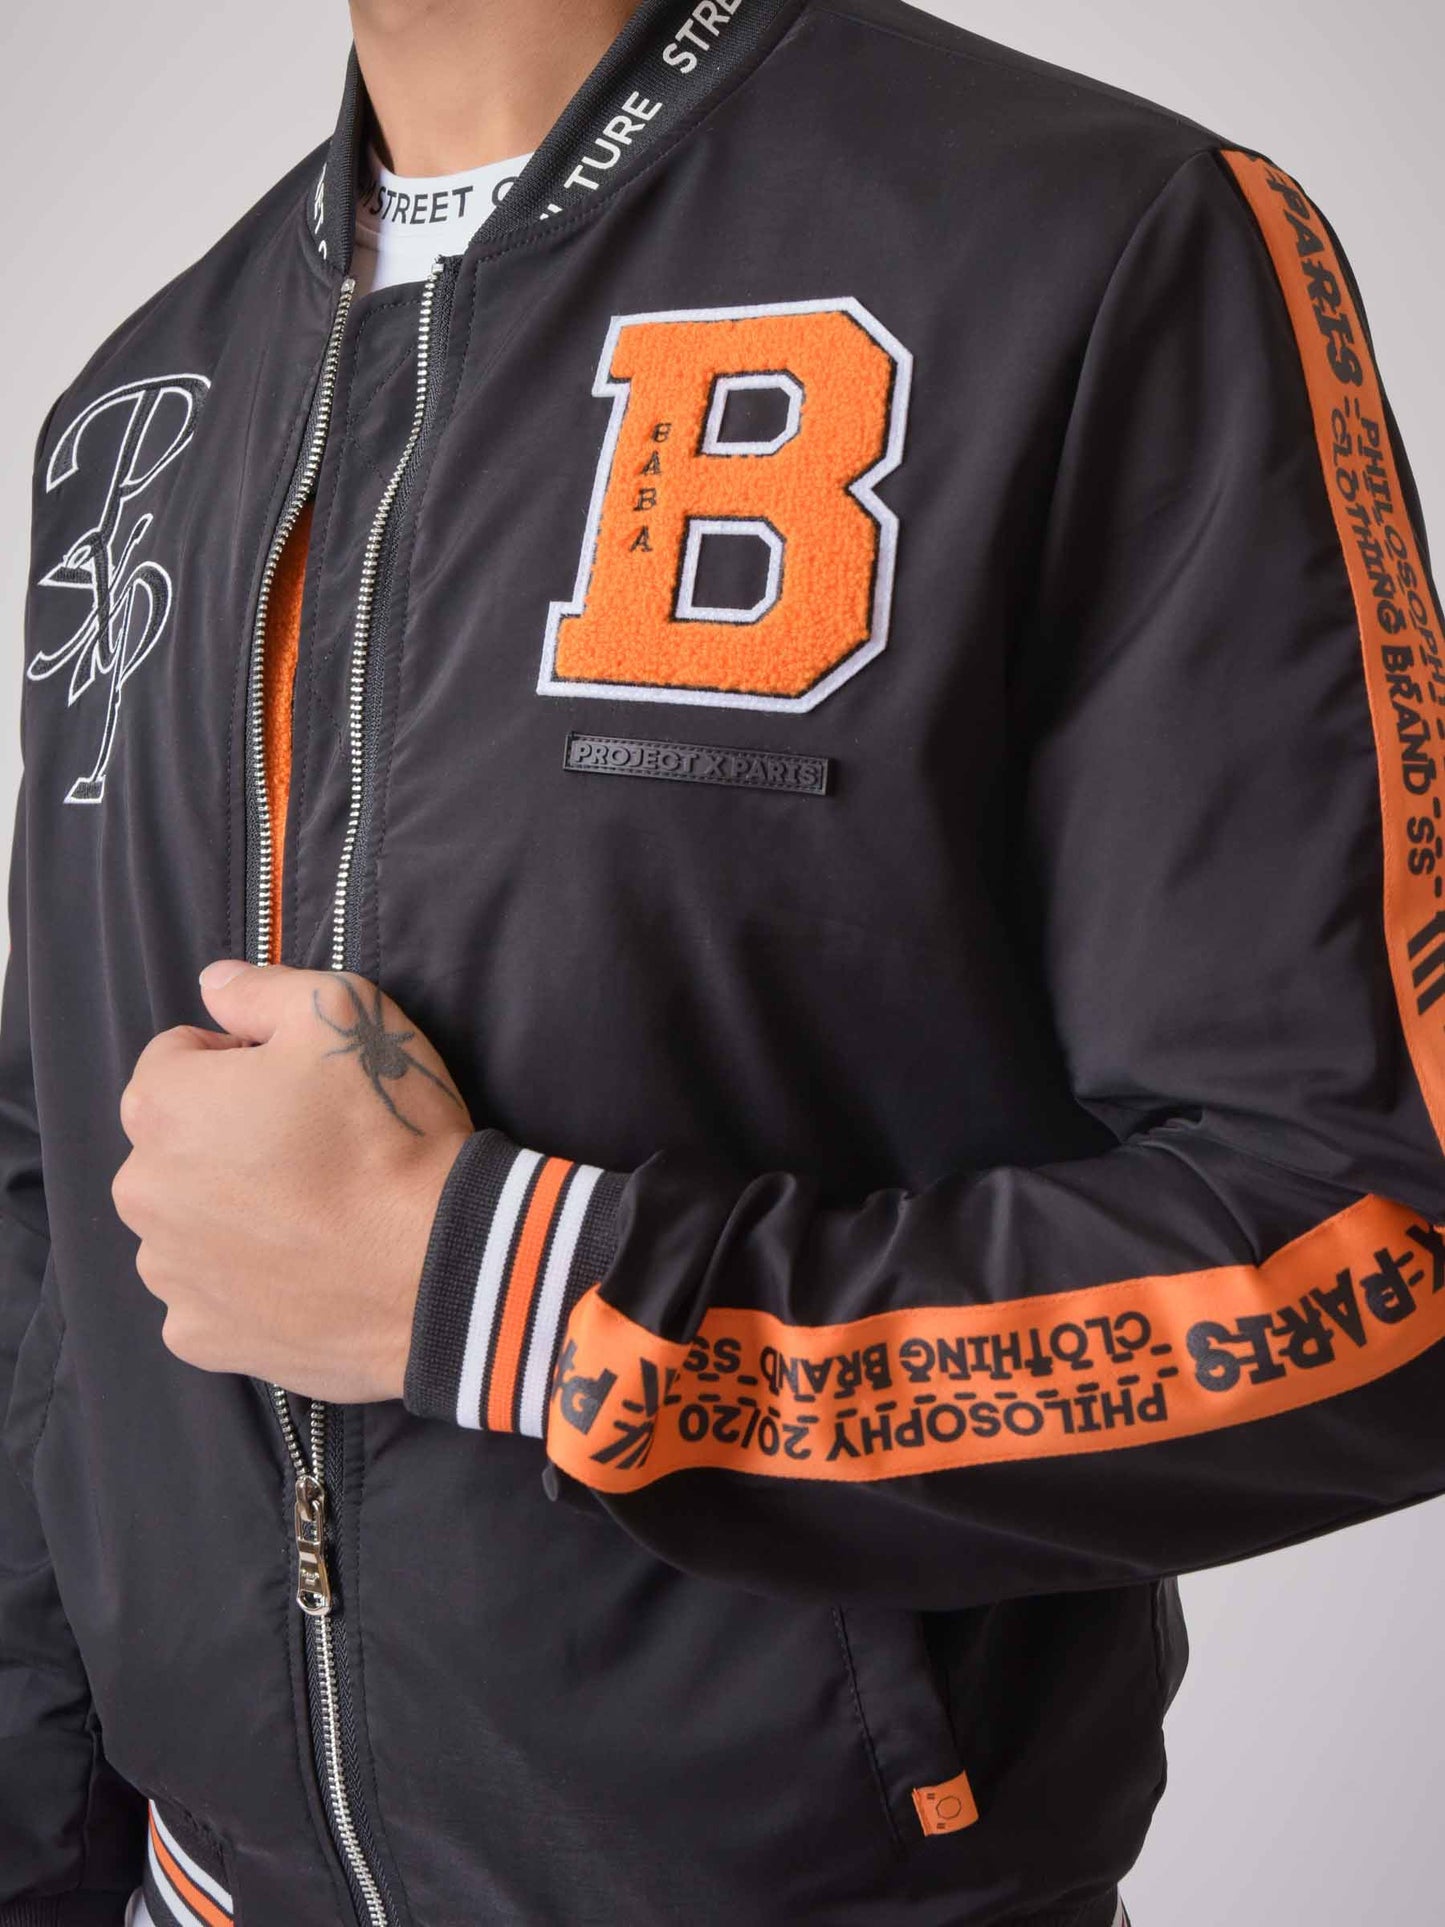 Veste col teddy Style baseball " Baba Collab" RR Store Online